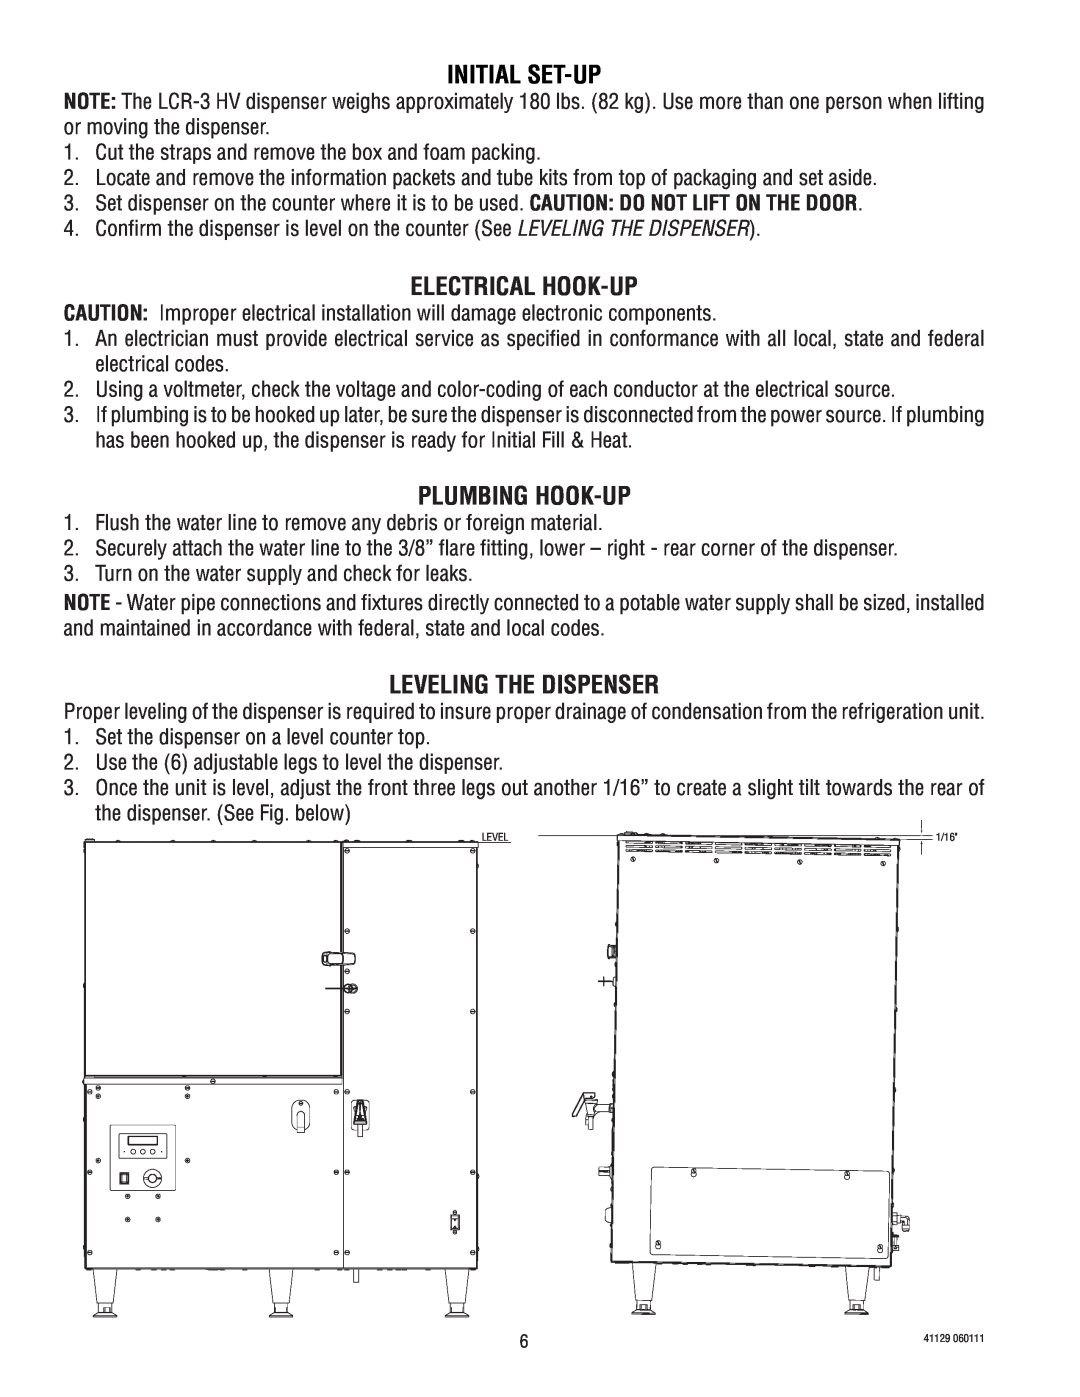 Bunn LCR-3 service manual Initial Set-Up, Electrical Hook-Up, Plumbing Hook-Up, Leveling The Dispenser 